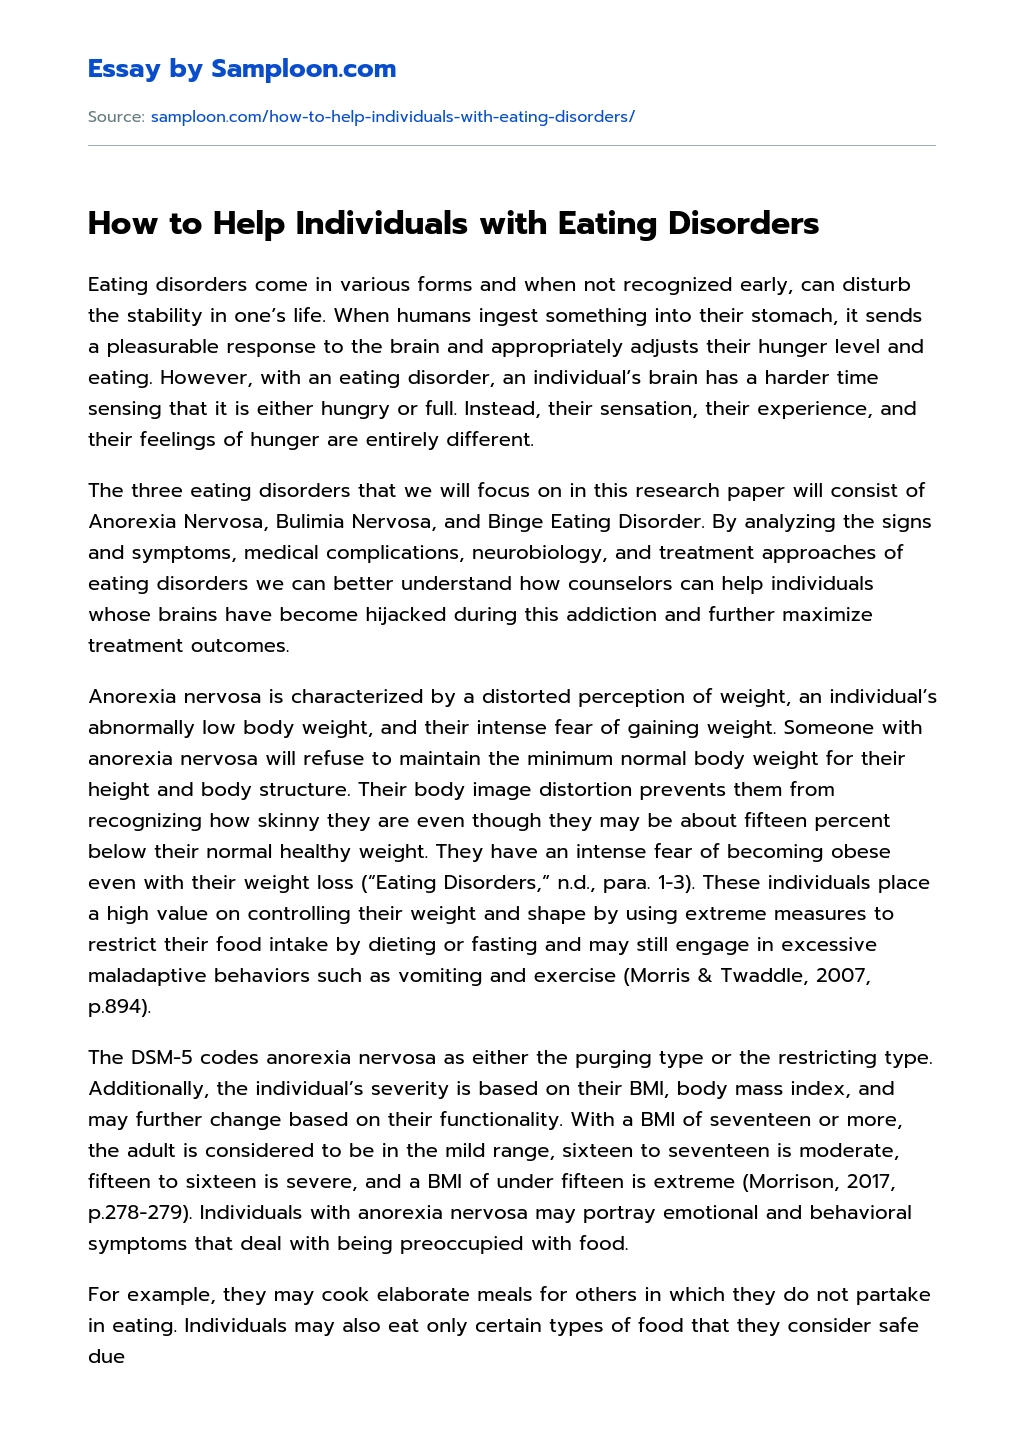 How to Help Individuals with Eating Disorders essay